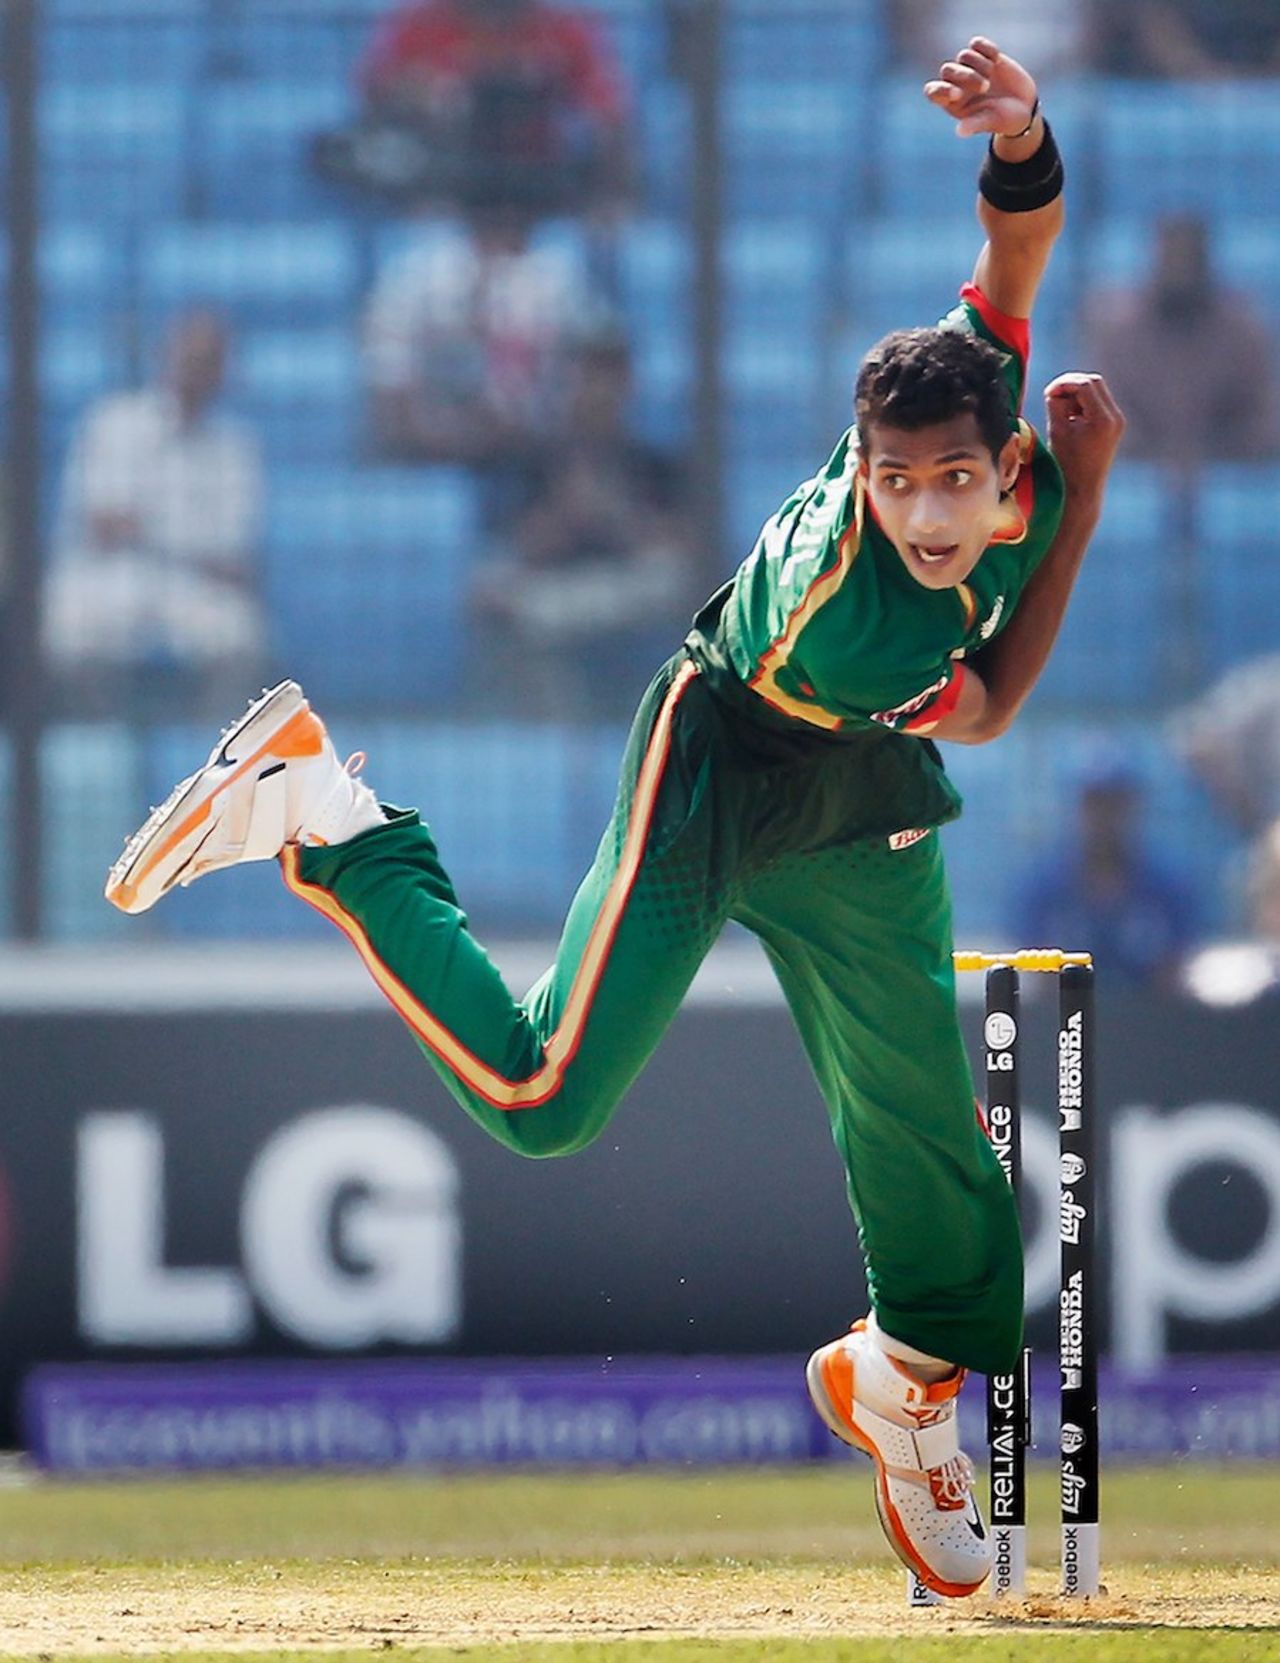 Shafiul Islam bowled a tight opening spell without a wicket, Bangladesh v Netherlands, Group B, World Cup 2011, Chittagong, March 14, 2011